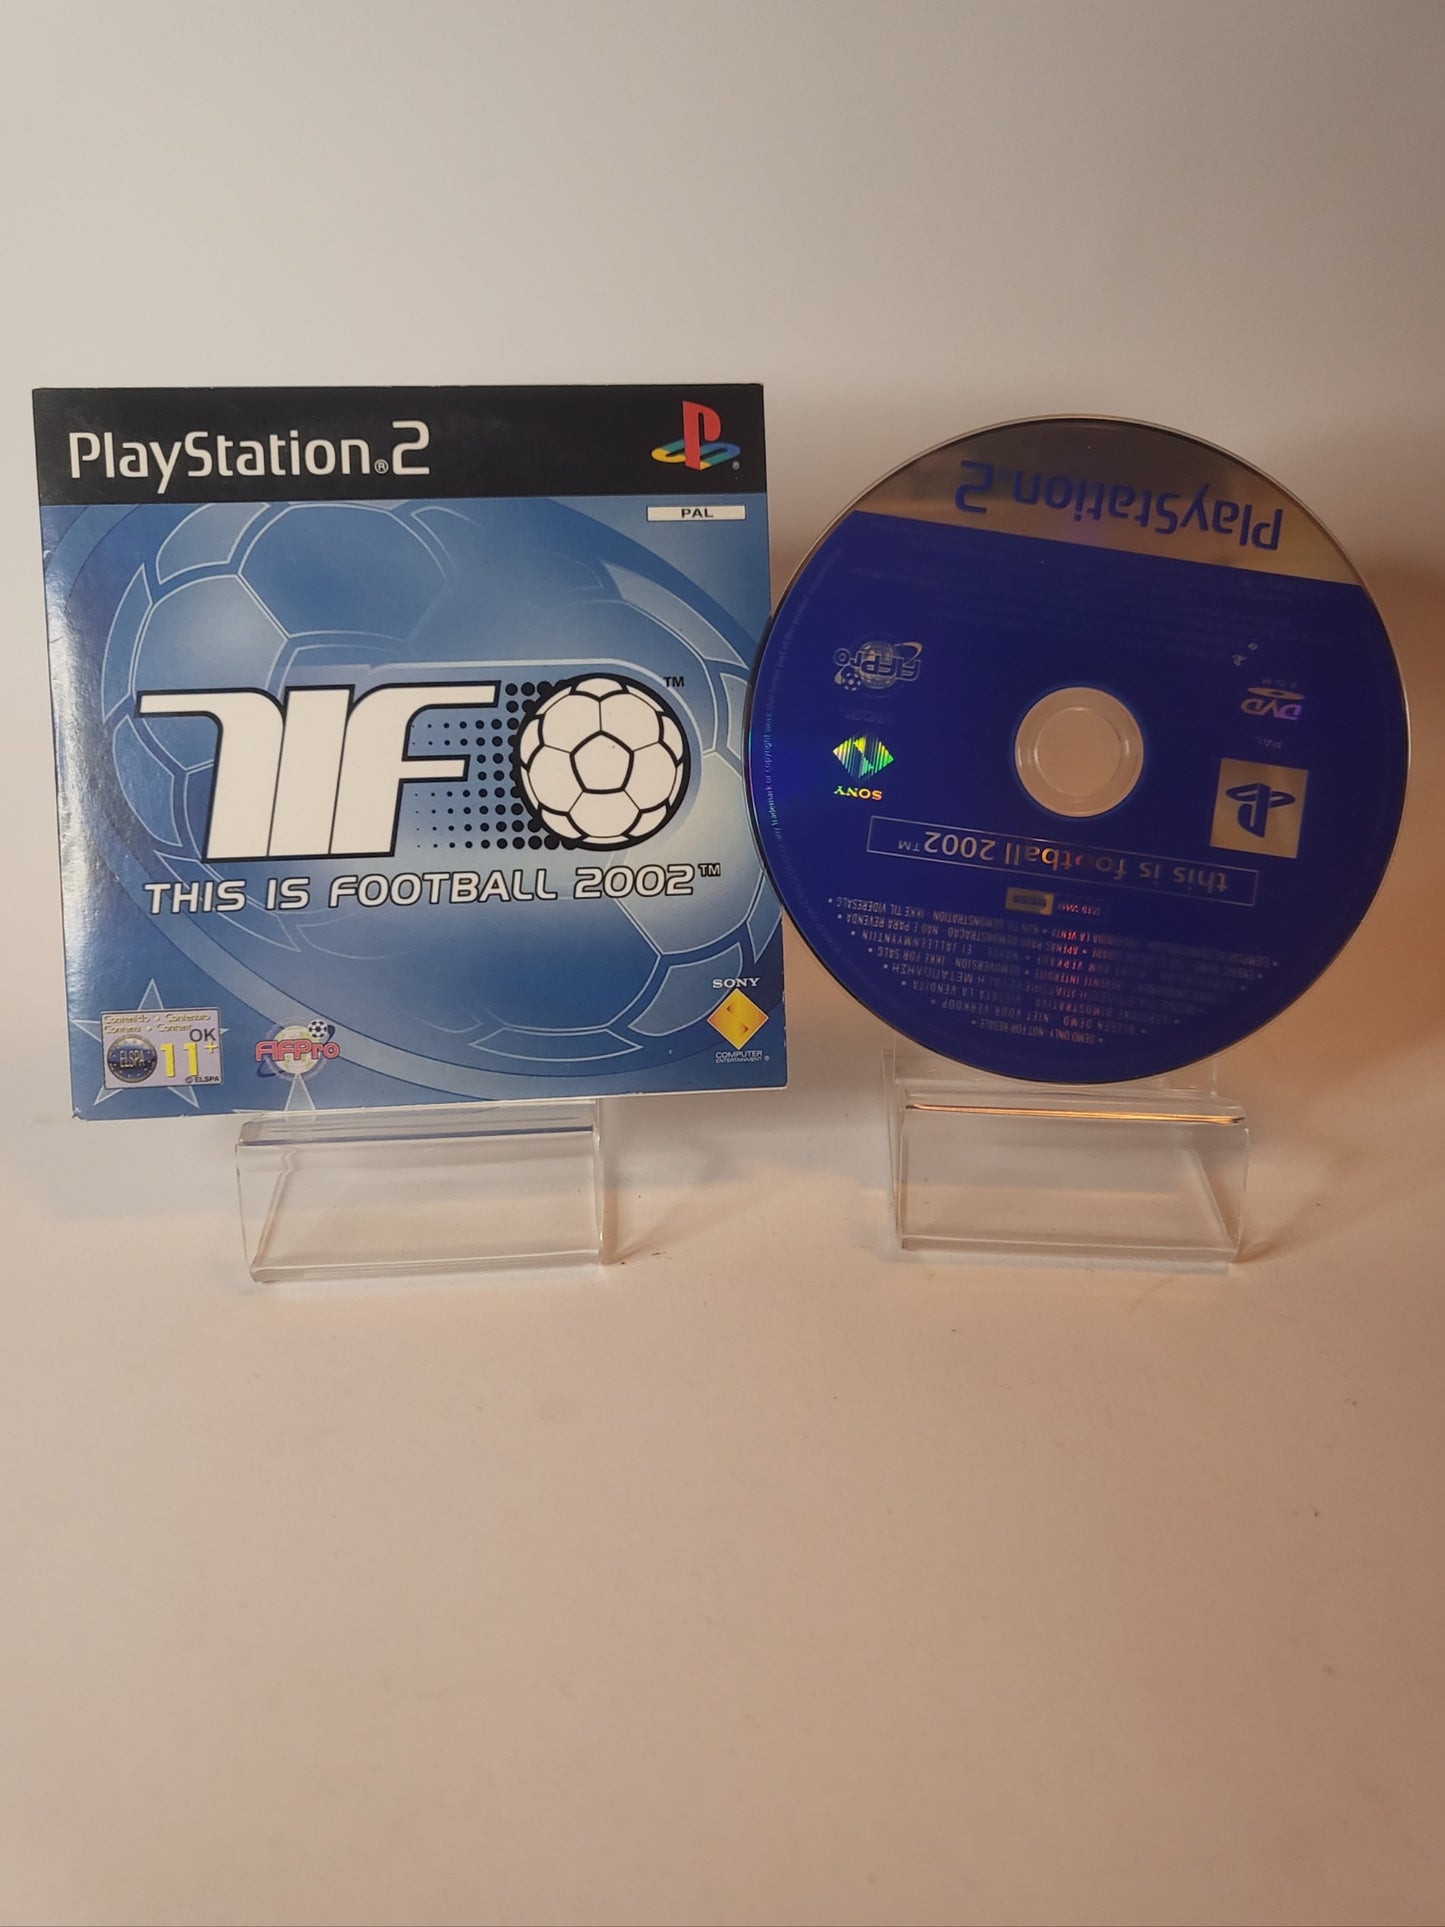 Demo Disc This is Football 2002 Playstation 2